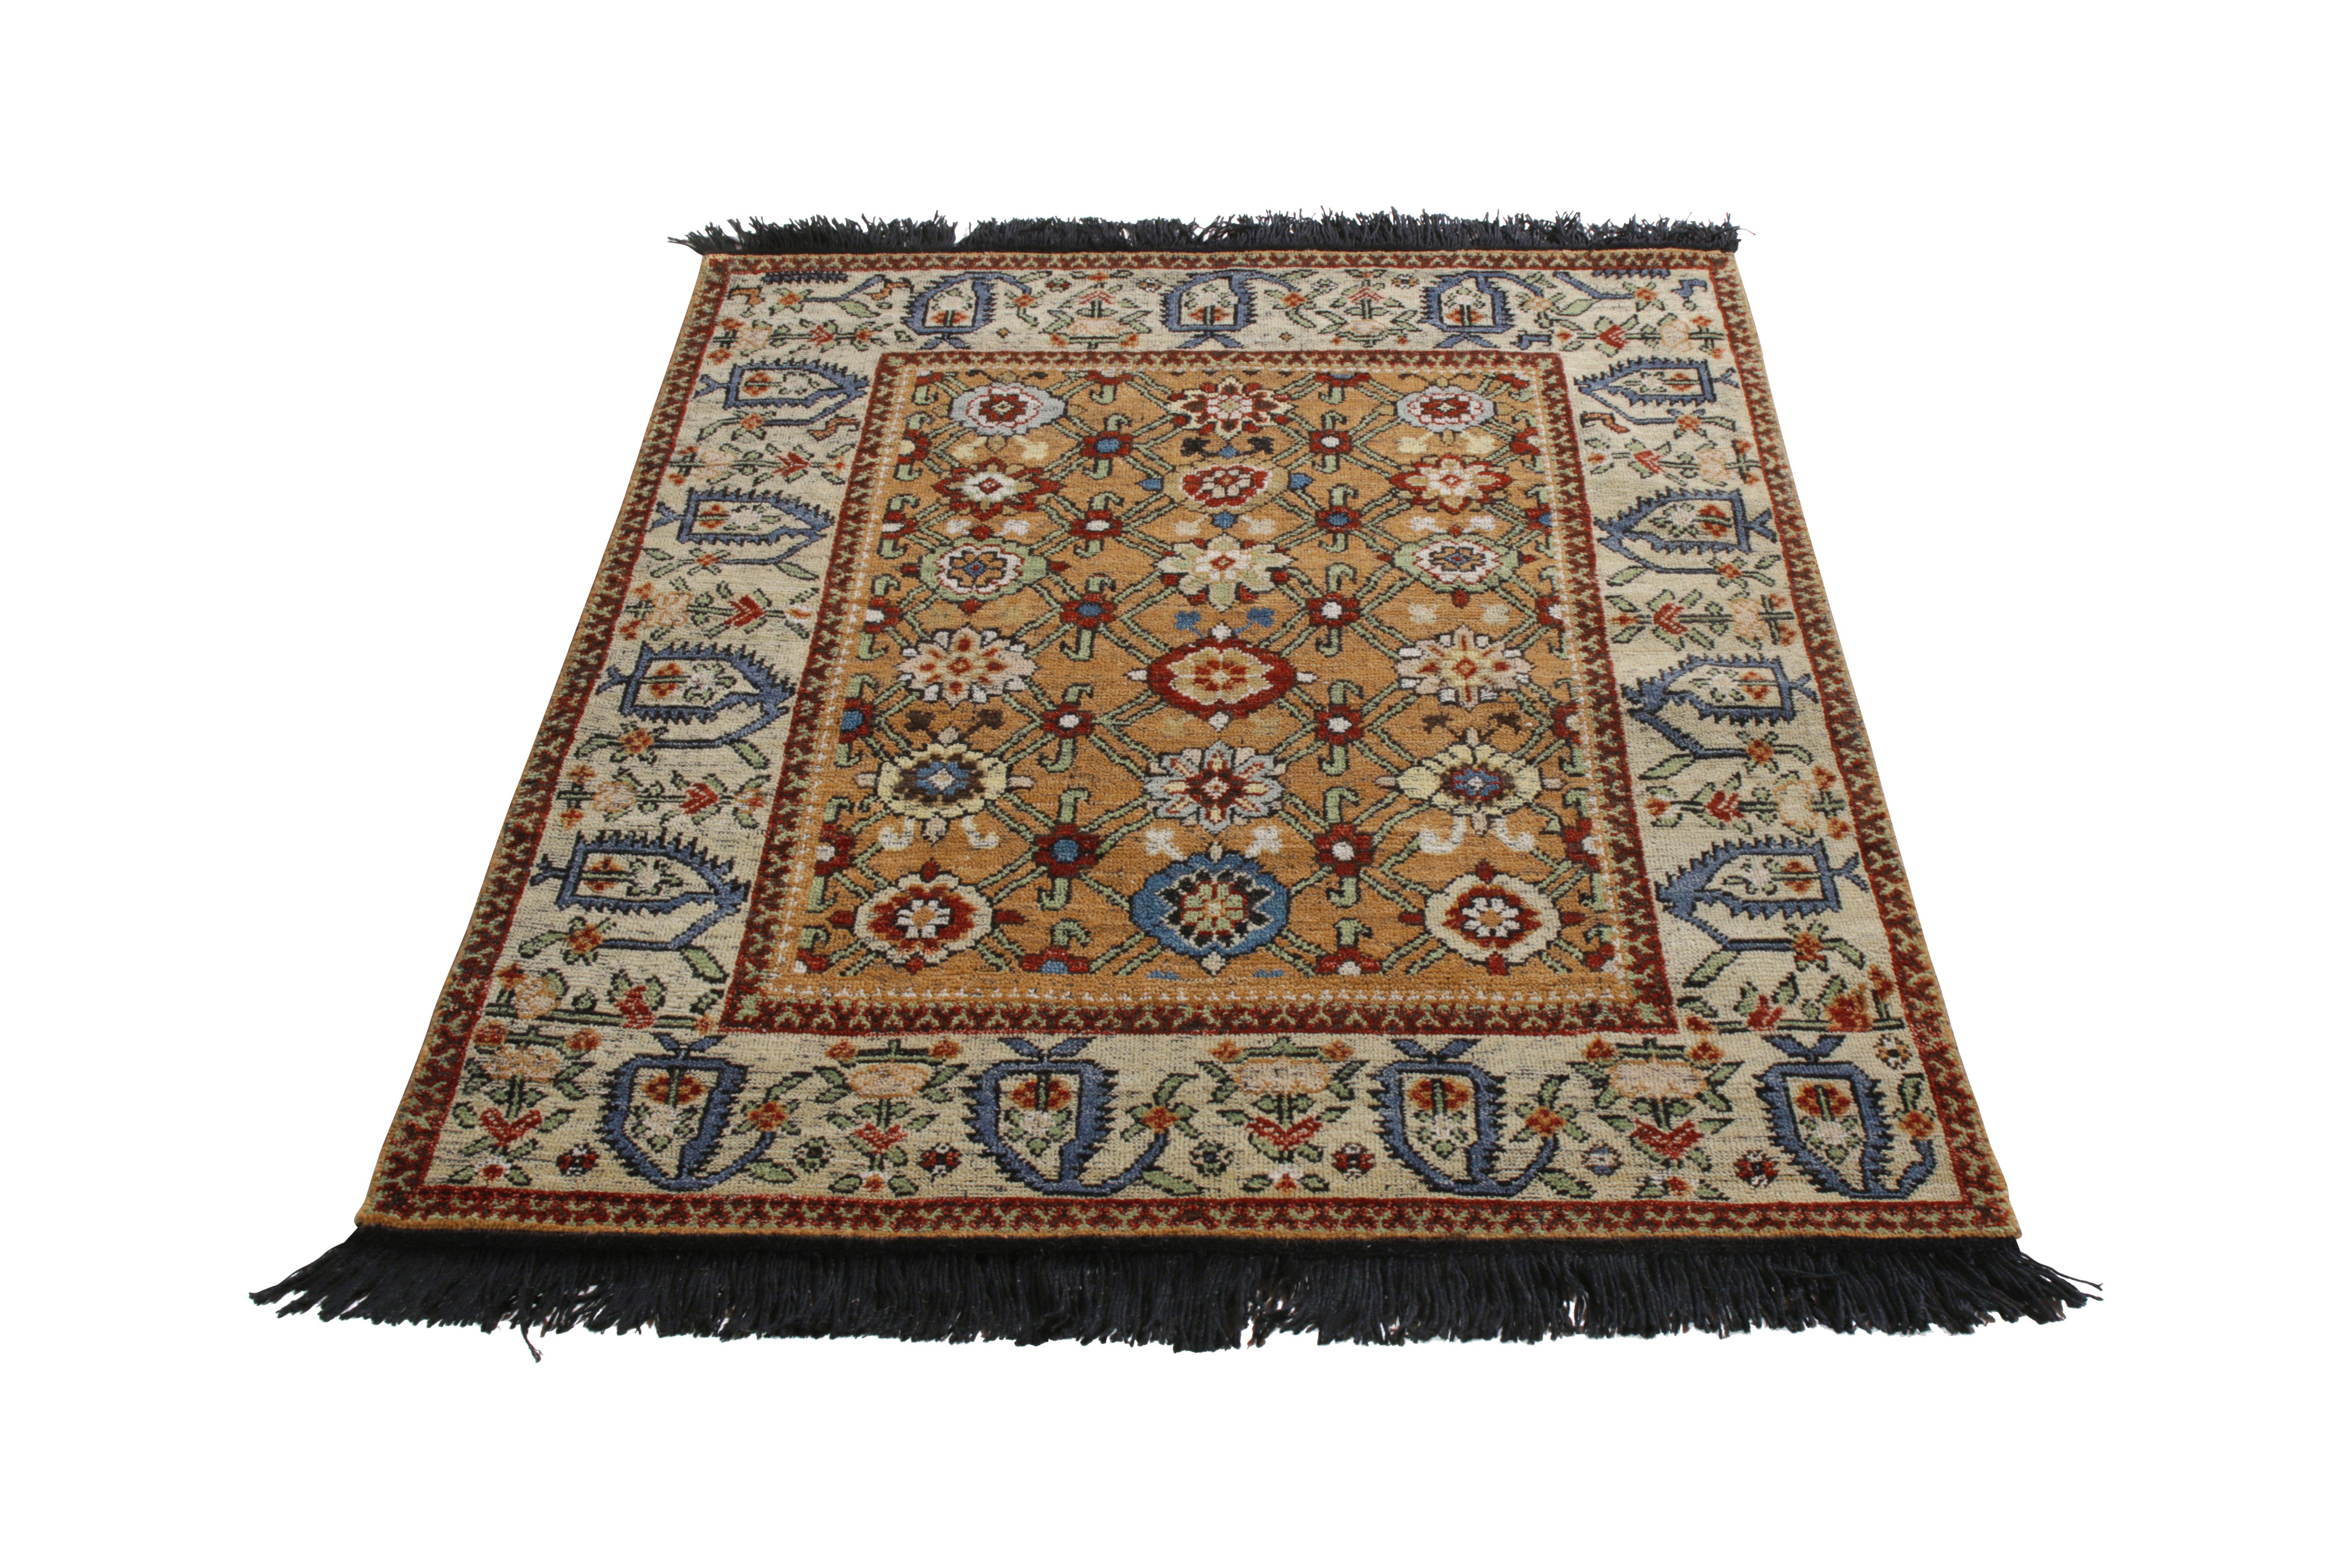 A 4x5 ode to celebrated transitional rug styles, from Rug & Kilim’s Burano Collection. 

Hand knotted in soft Ghazni wool, enjoying beige-brown with sought-after red and blue hues accenting the all over floral pattern. 

A classic complemented